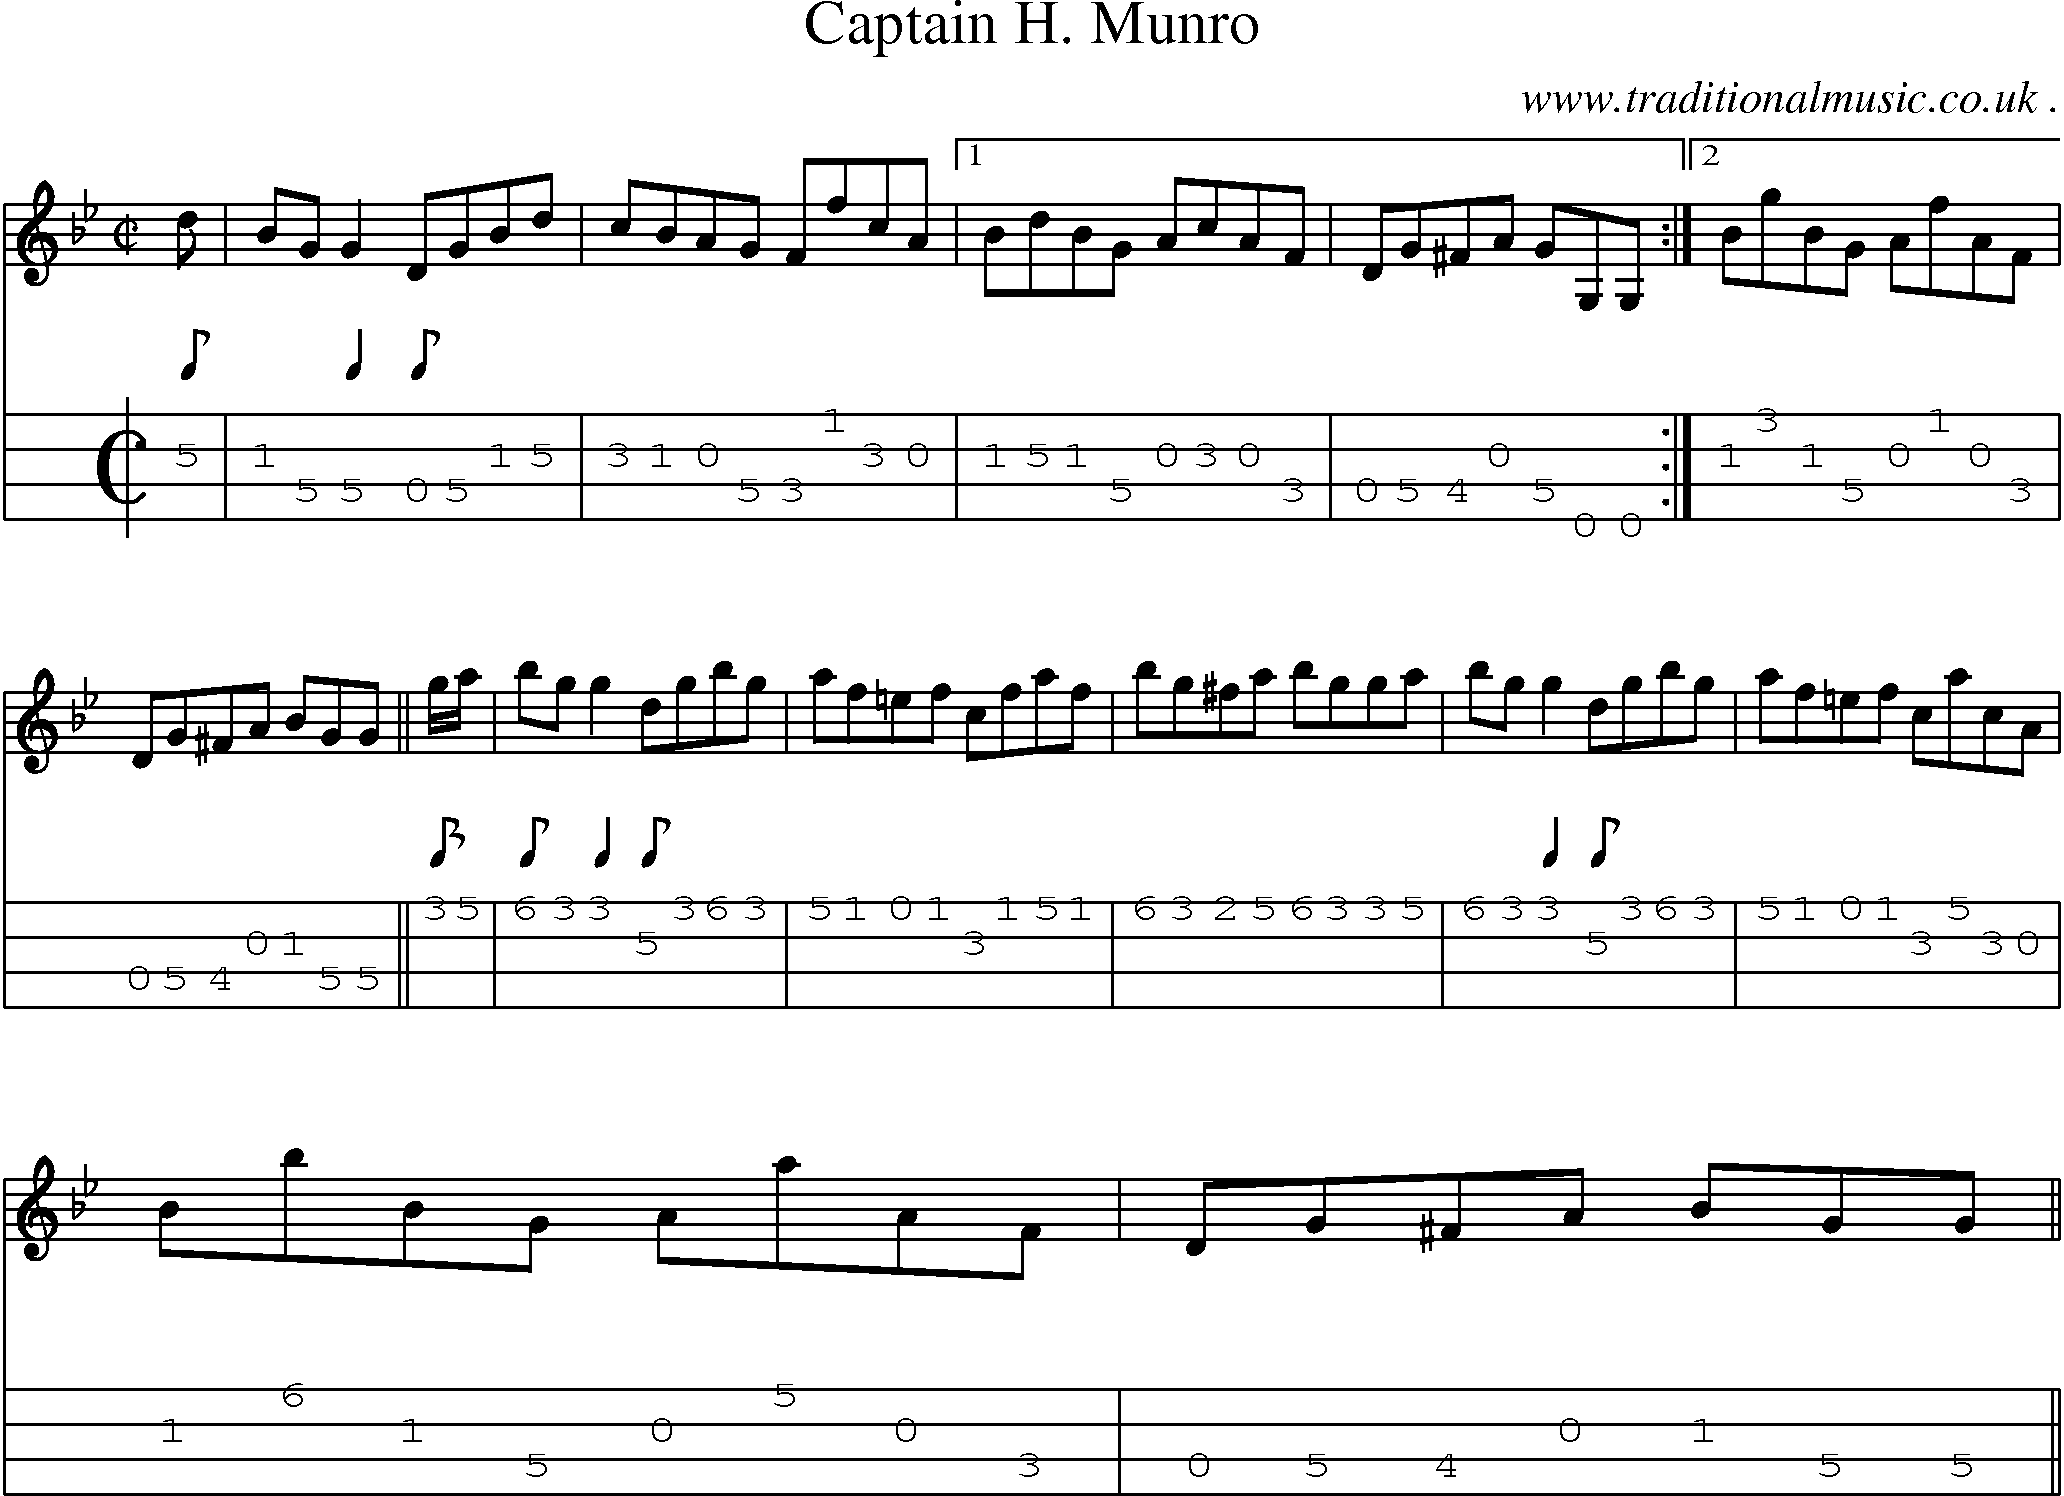 Sheet-music  score, Chords and Mandolin Tabs for Captain H Munro